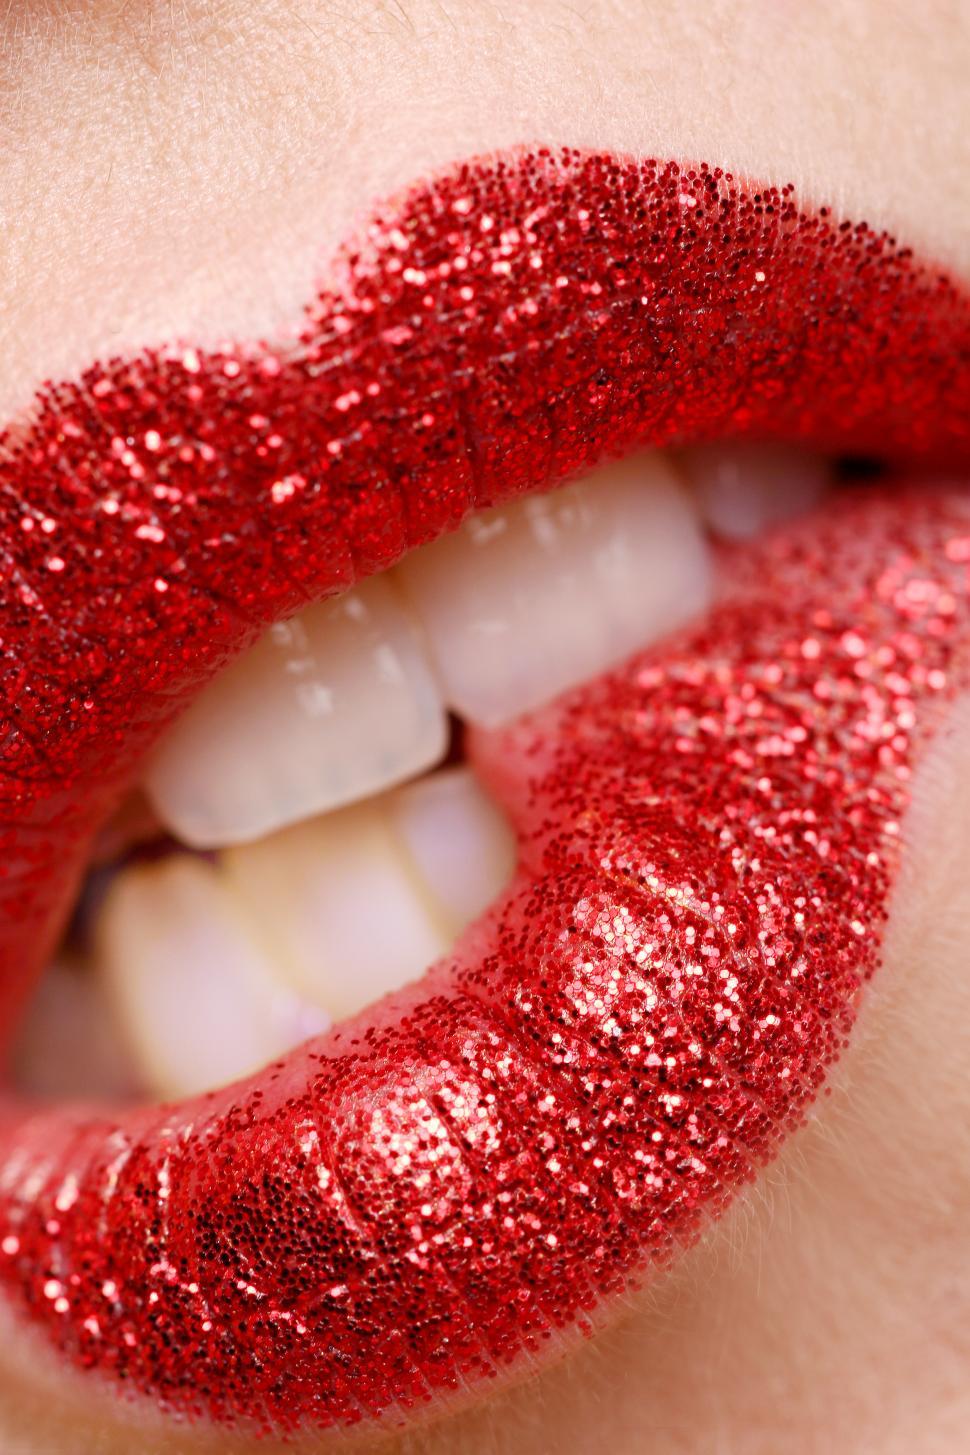 Free Image of lips with sparkly red lipstick 